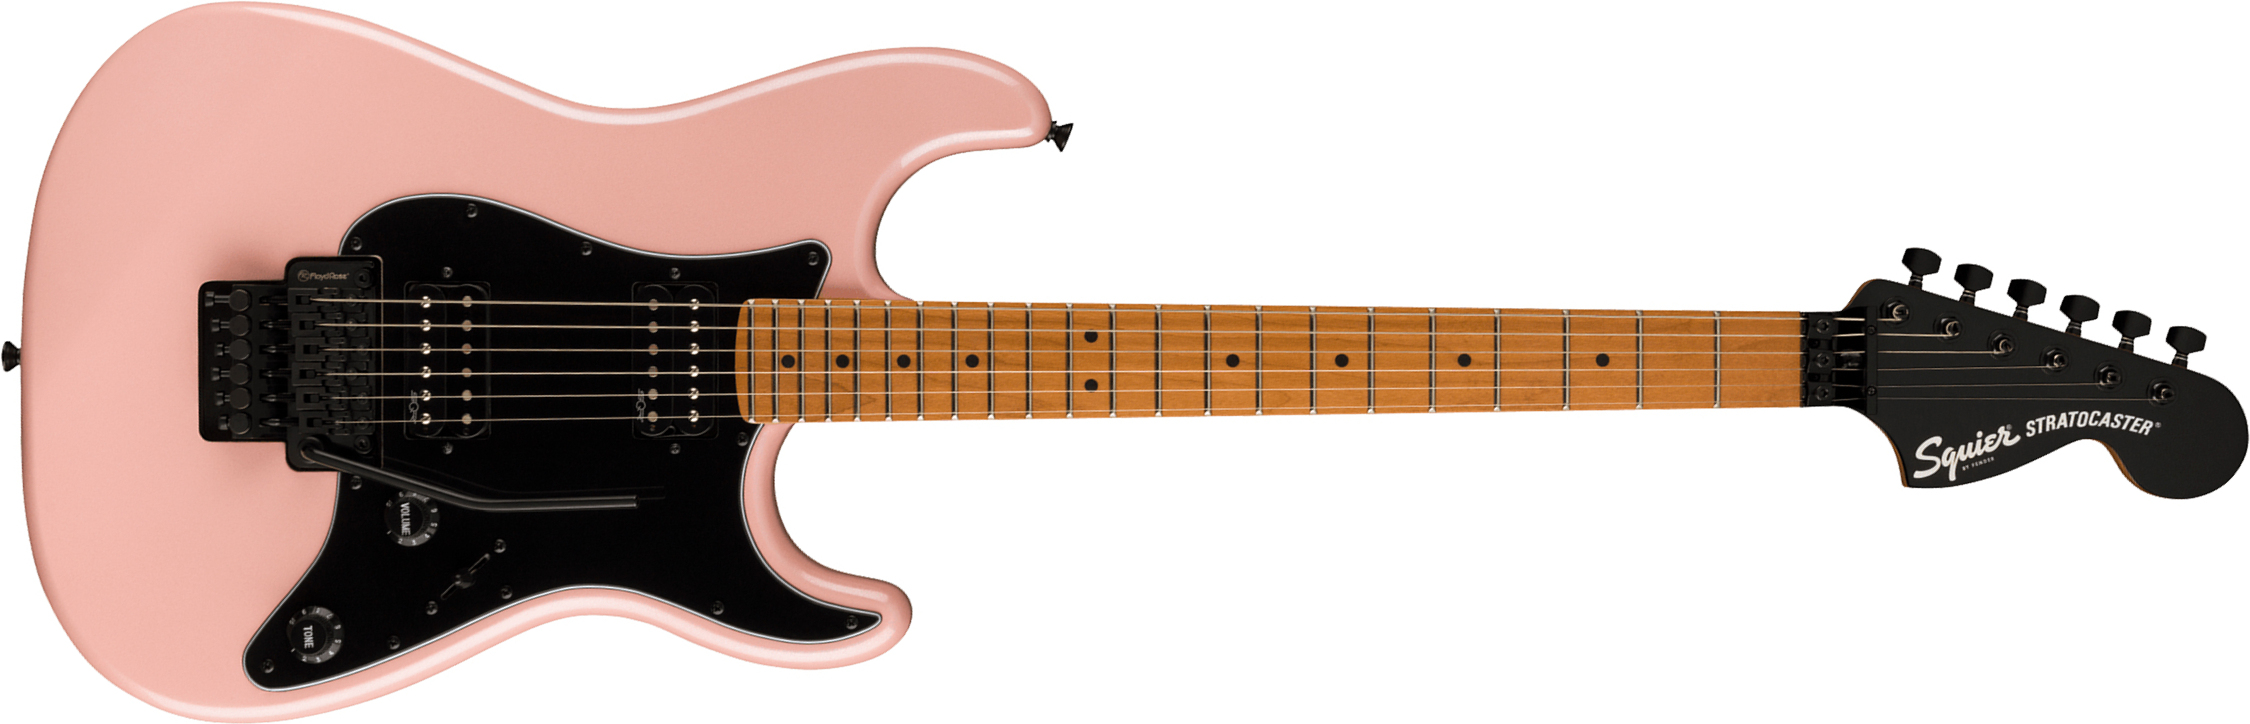 Squier Strat Contemporary Hh Fr Mn - Shell Pink Pearl - Guitare Électrique Forme Str - Main picture